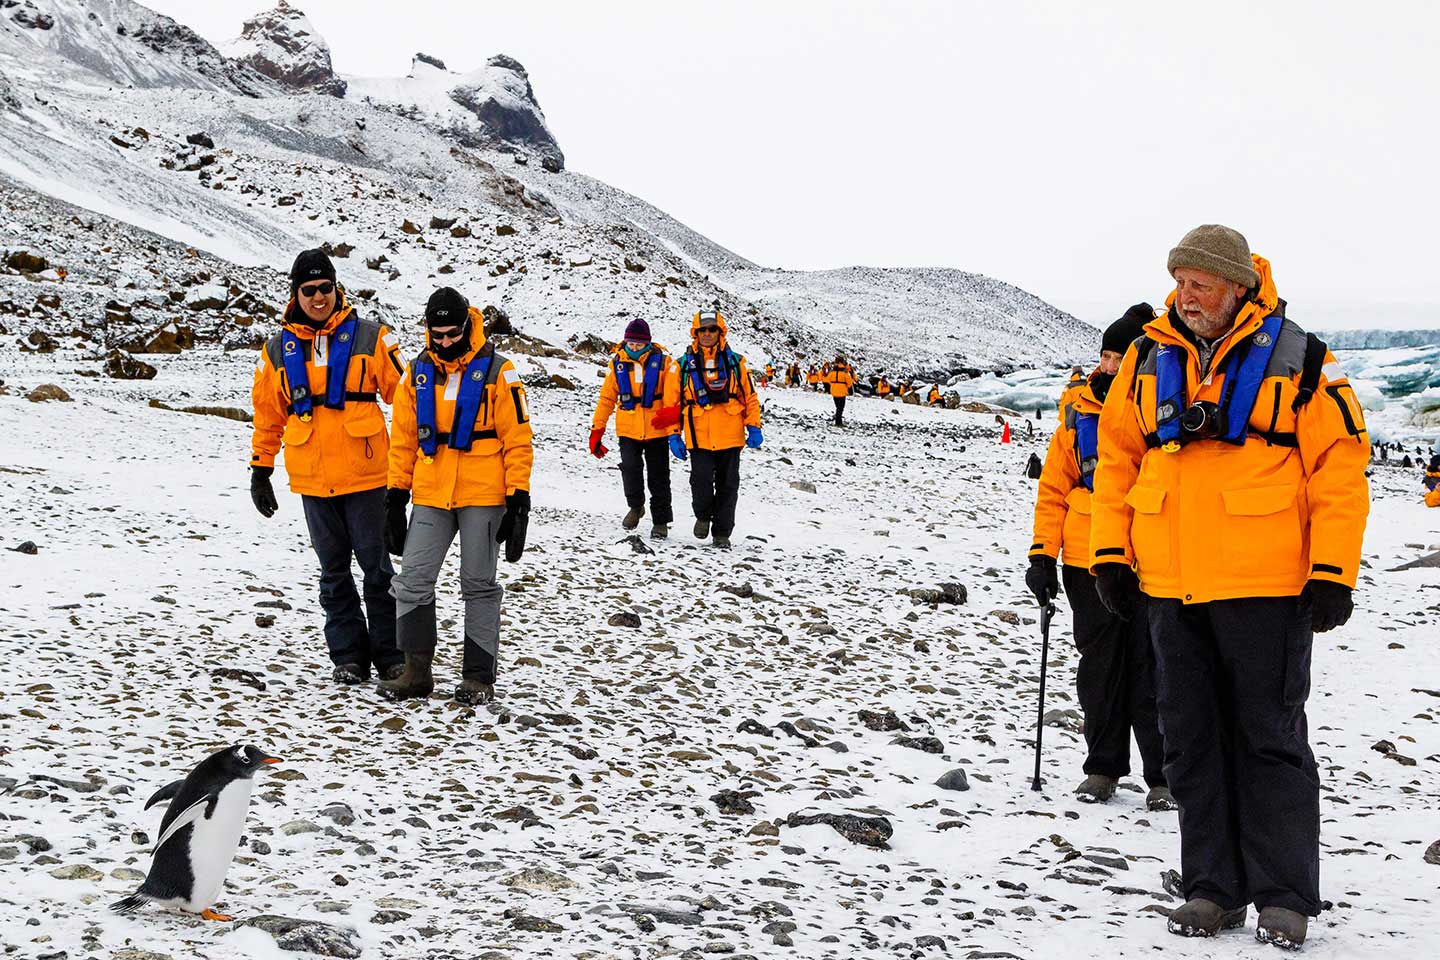 Hiking in Antarctica is geared to all ages and levels of fitness. Everyone gets to participate!